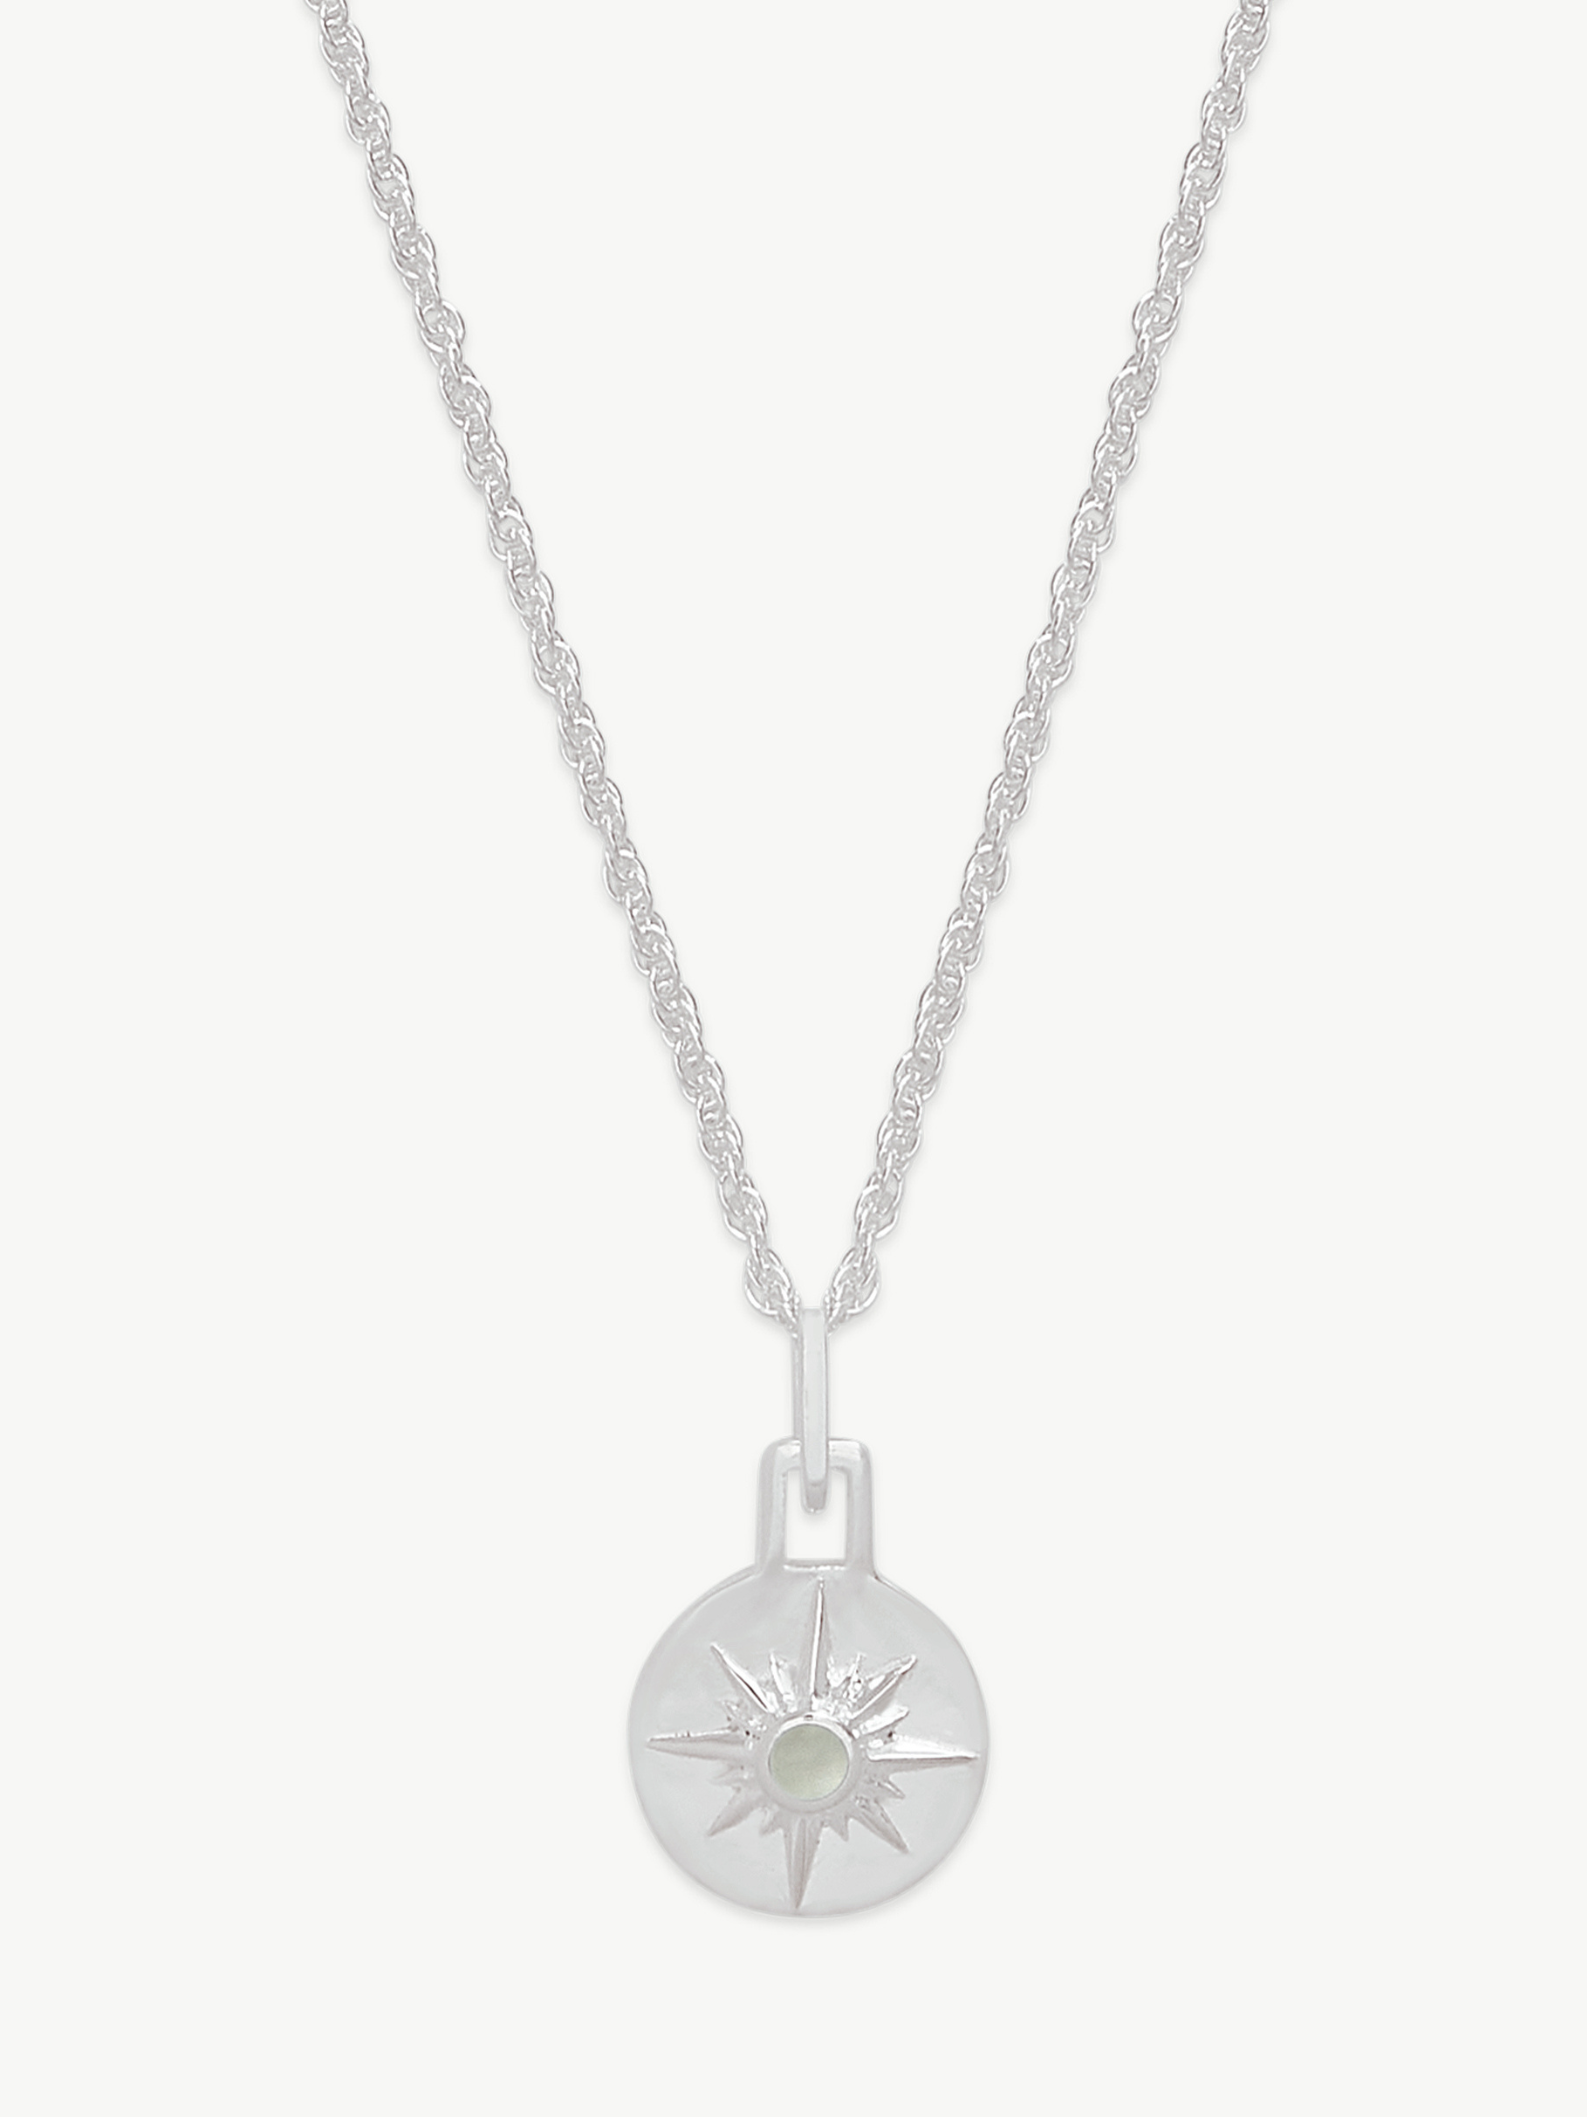 MINI ASTRID NECKLACE 16" CHAIN <br> Sterling Silver - White Mother of Pearl